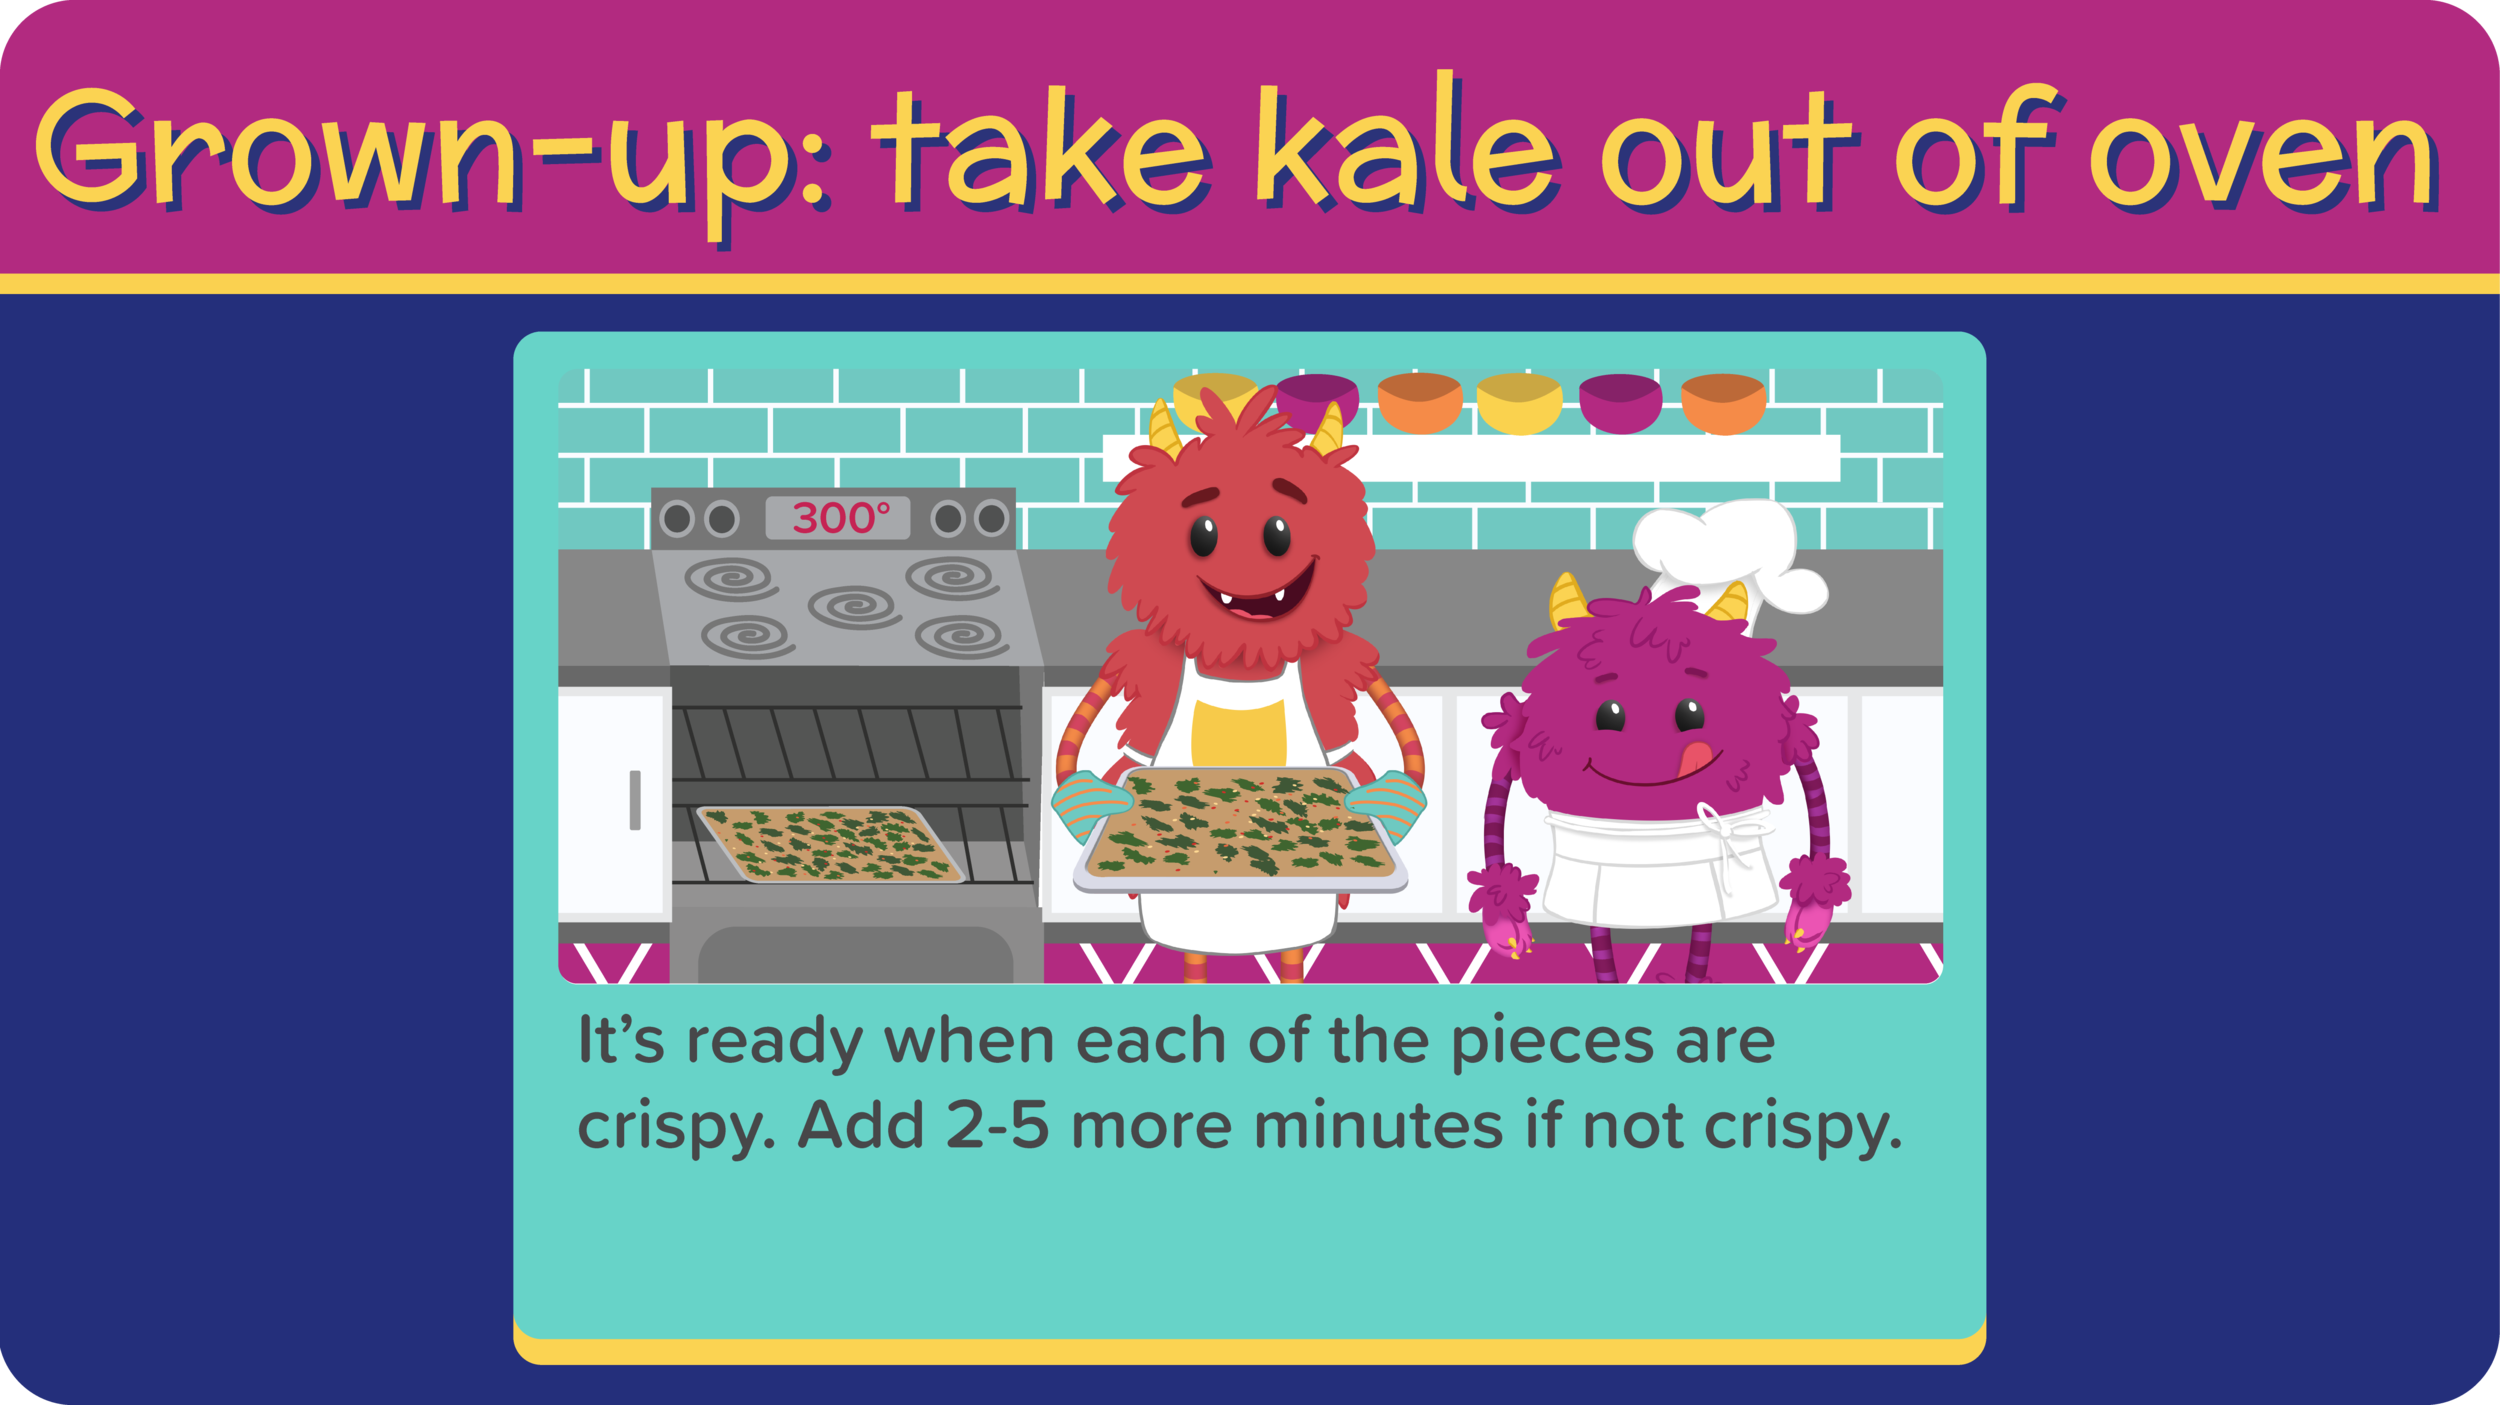 28_SpicyTacoKaleChips_take kale out of the oven-01.png